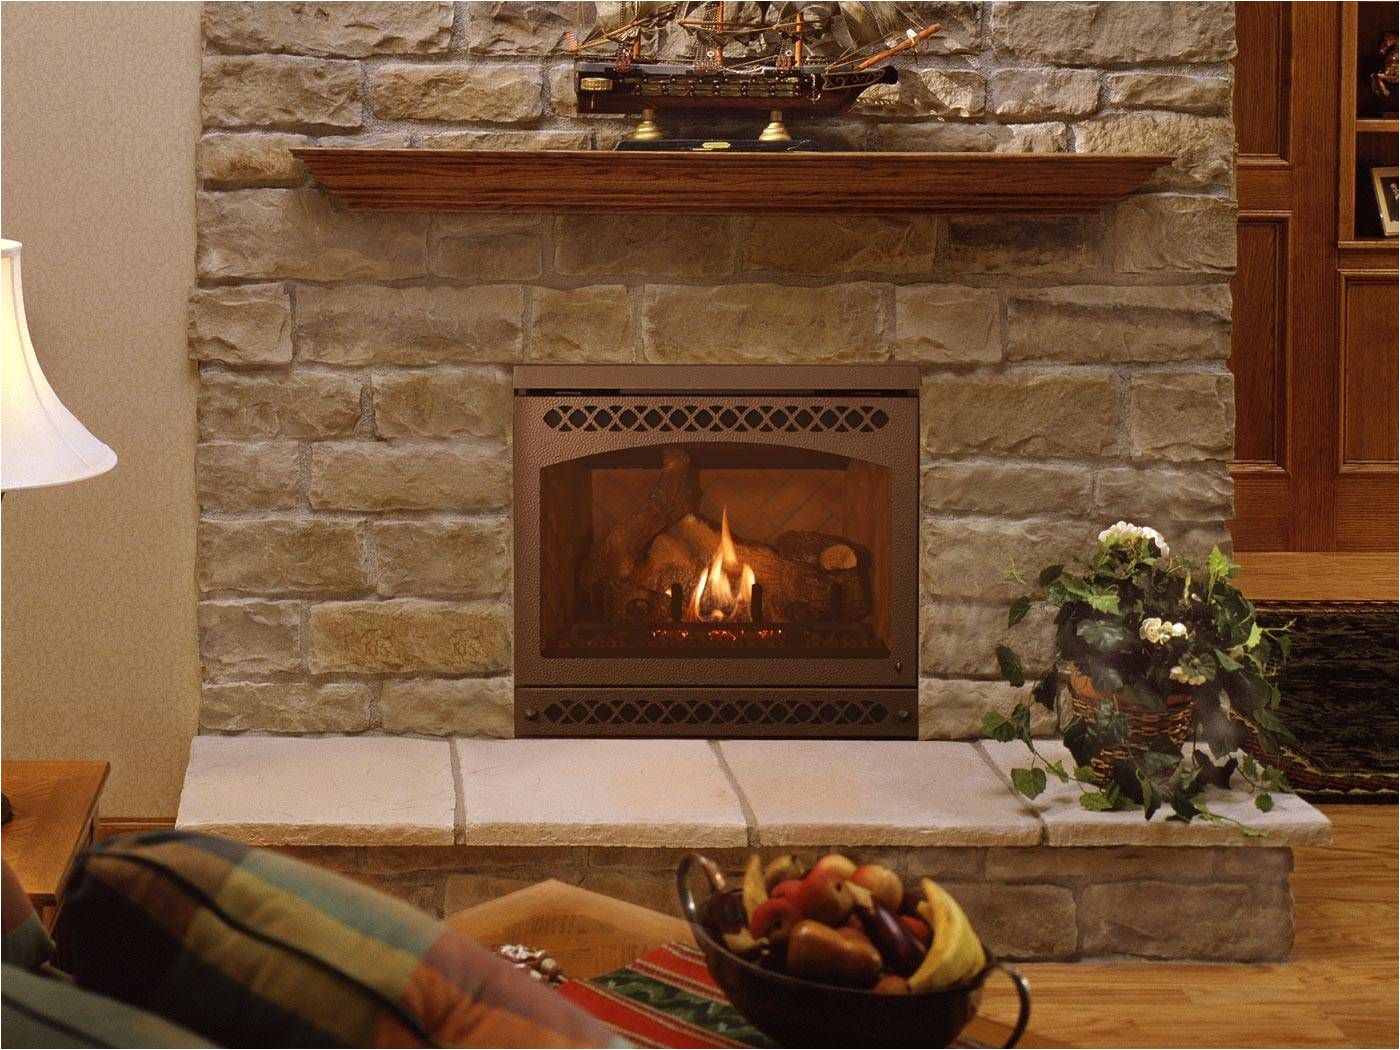 quadra fire qv32a gas fireplace i like this one it s expensive but i like the flush look would have a mantle instead of stone work for the gas stove